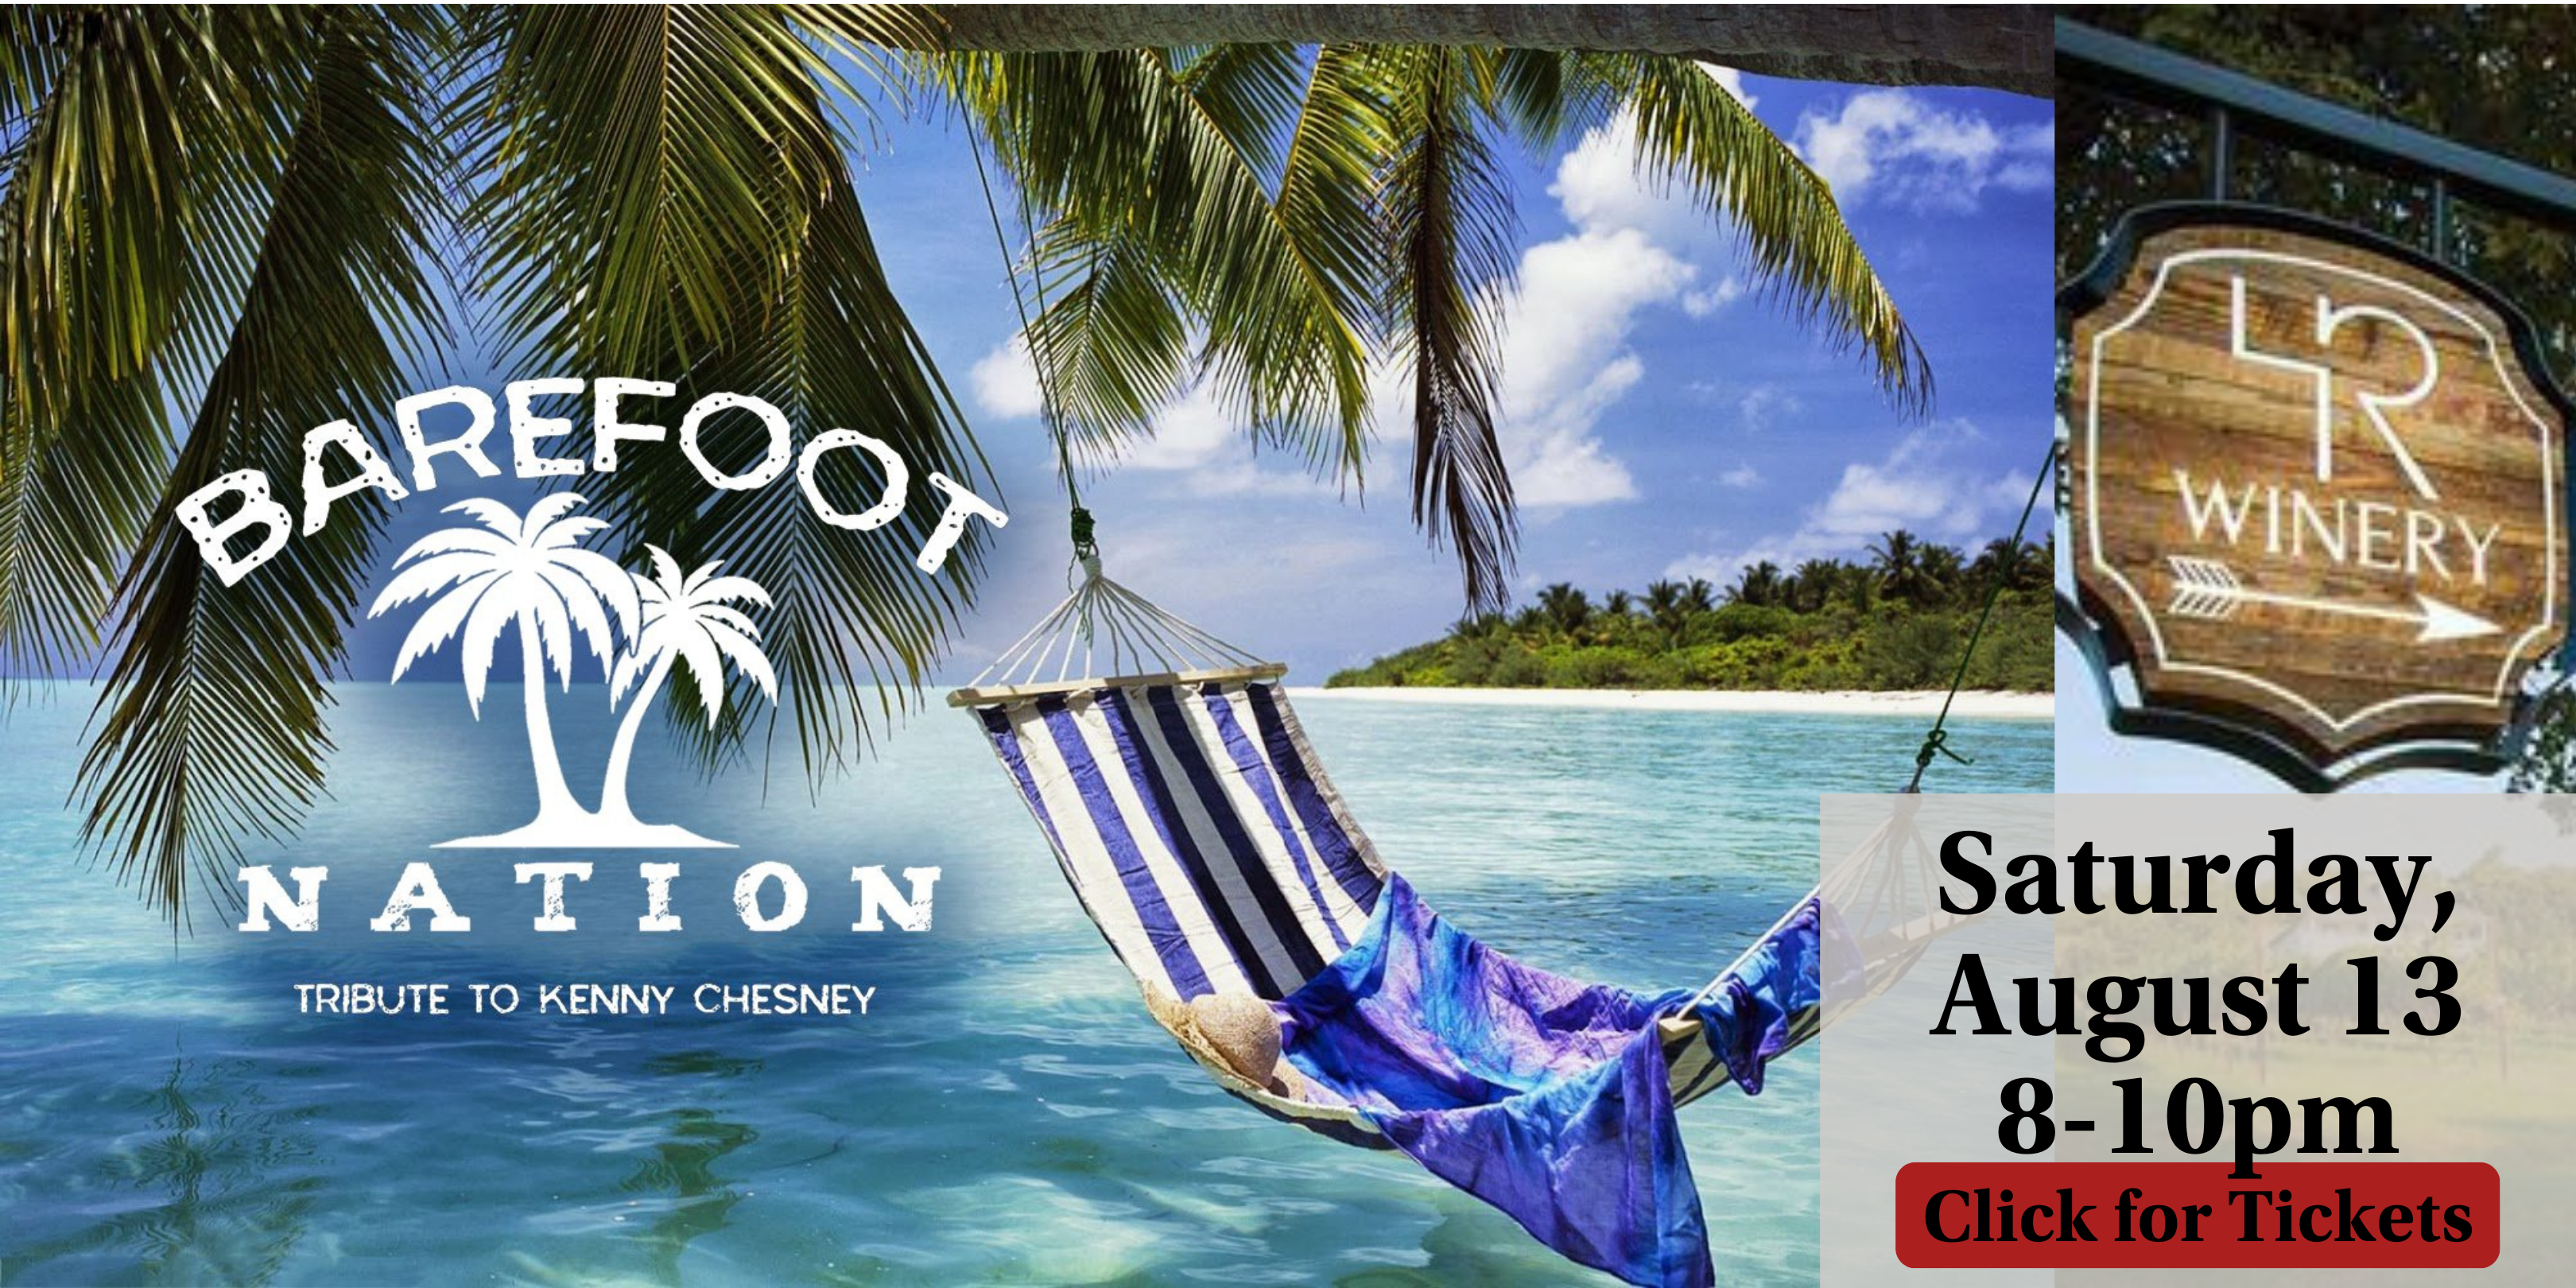 Barefoot Nation: Tribute to Kenny Chesney